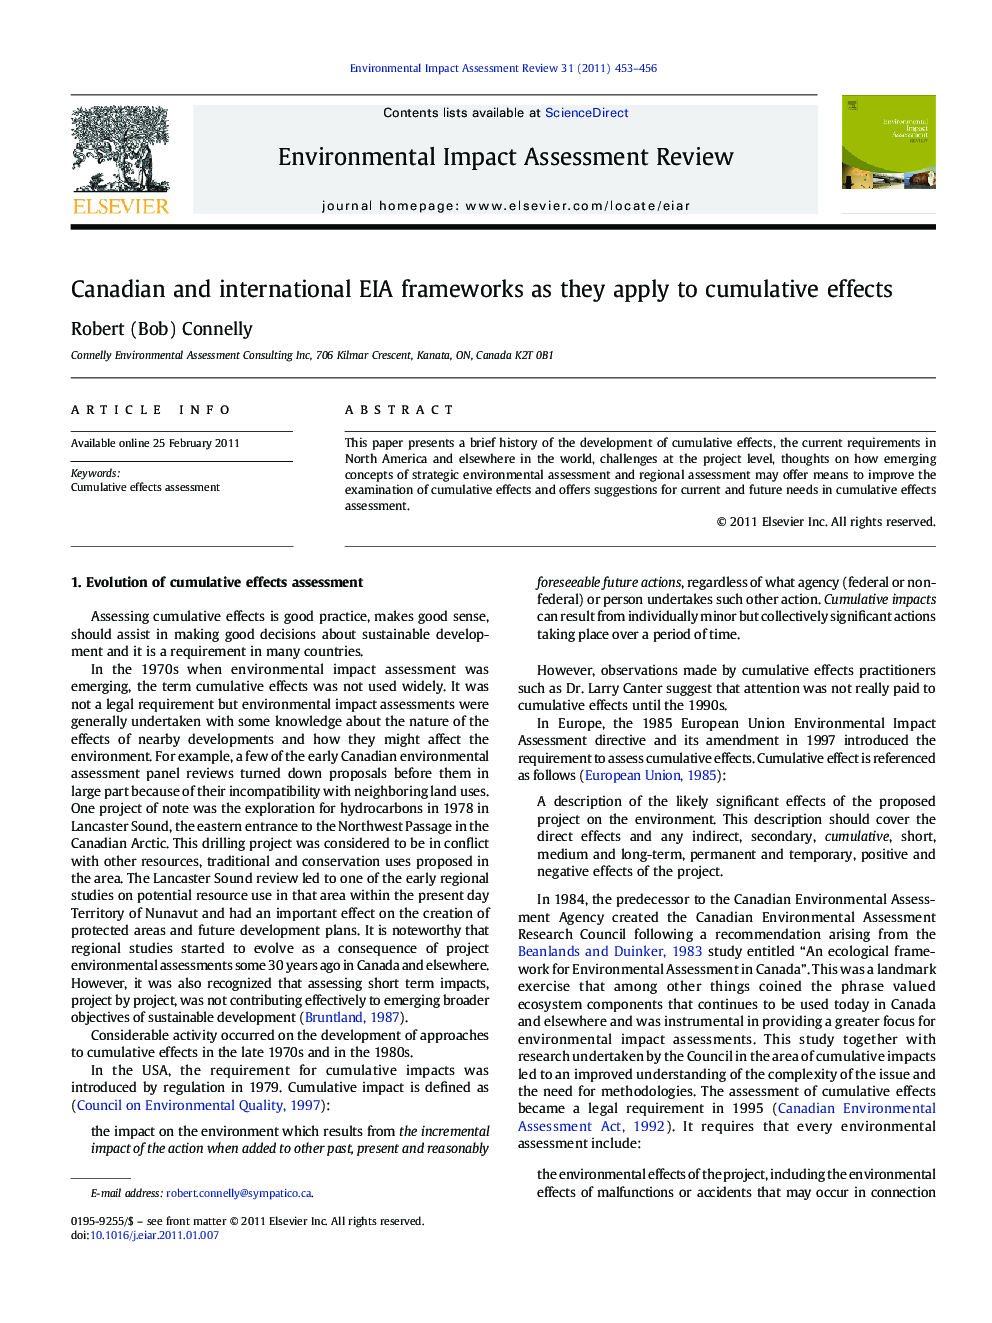 Canadian and international EIA frameworks as they apply to cumulative effects